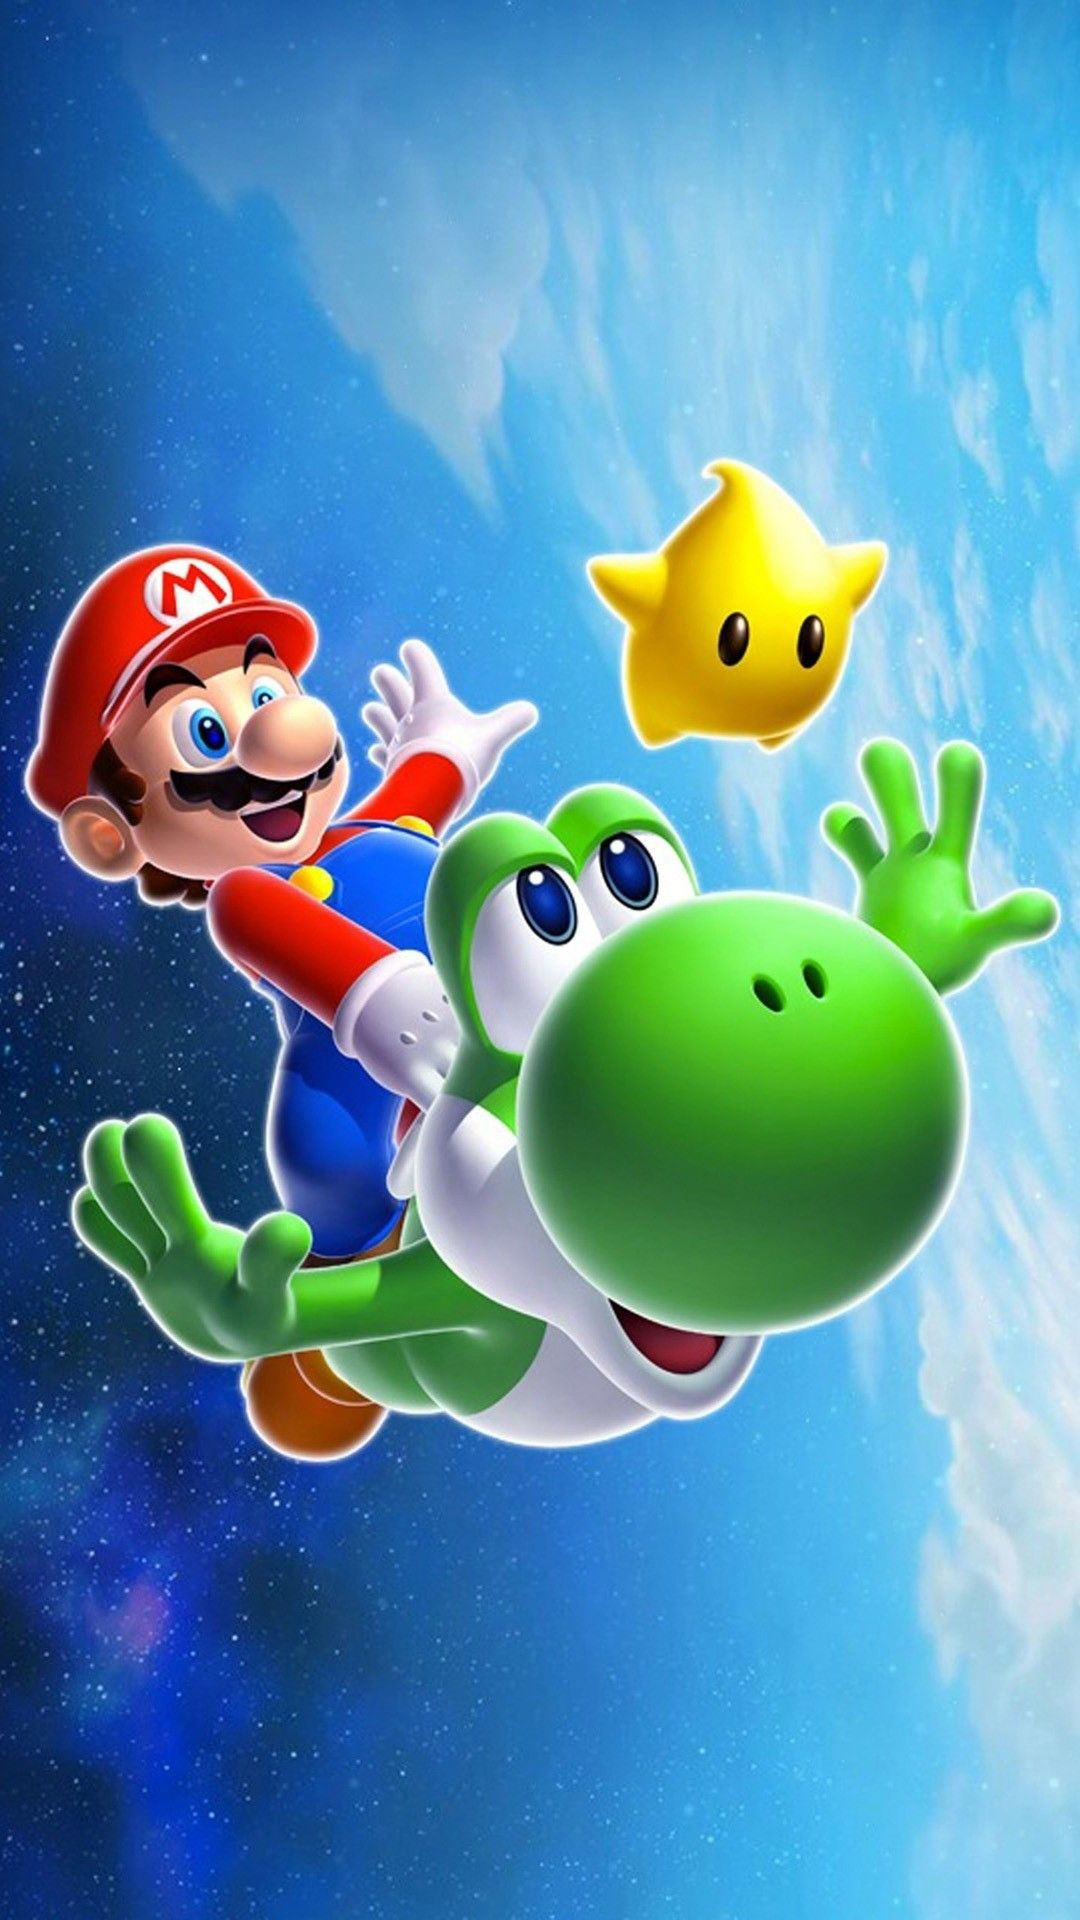 1080x1920 Super Mario Android Wallpapers